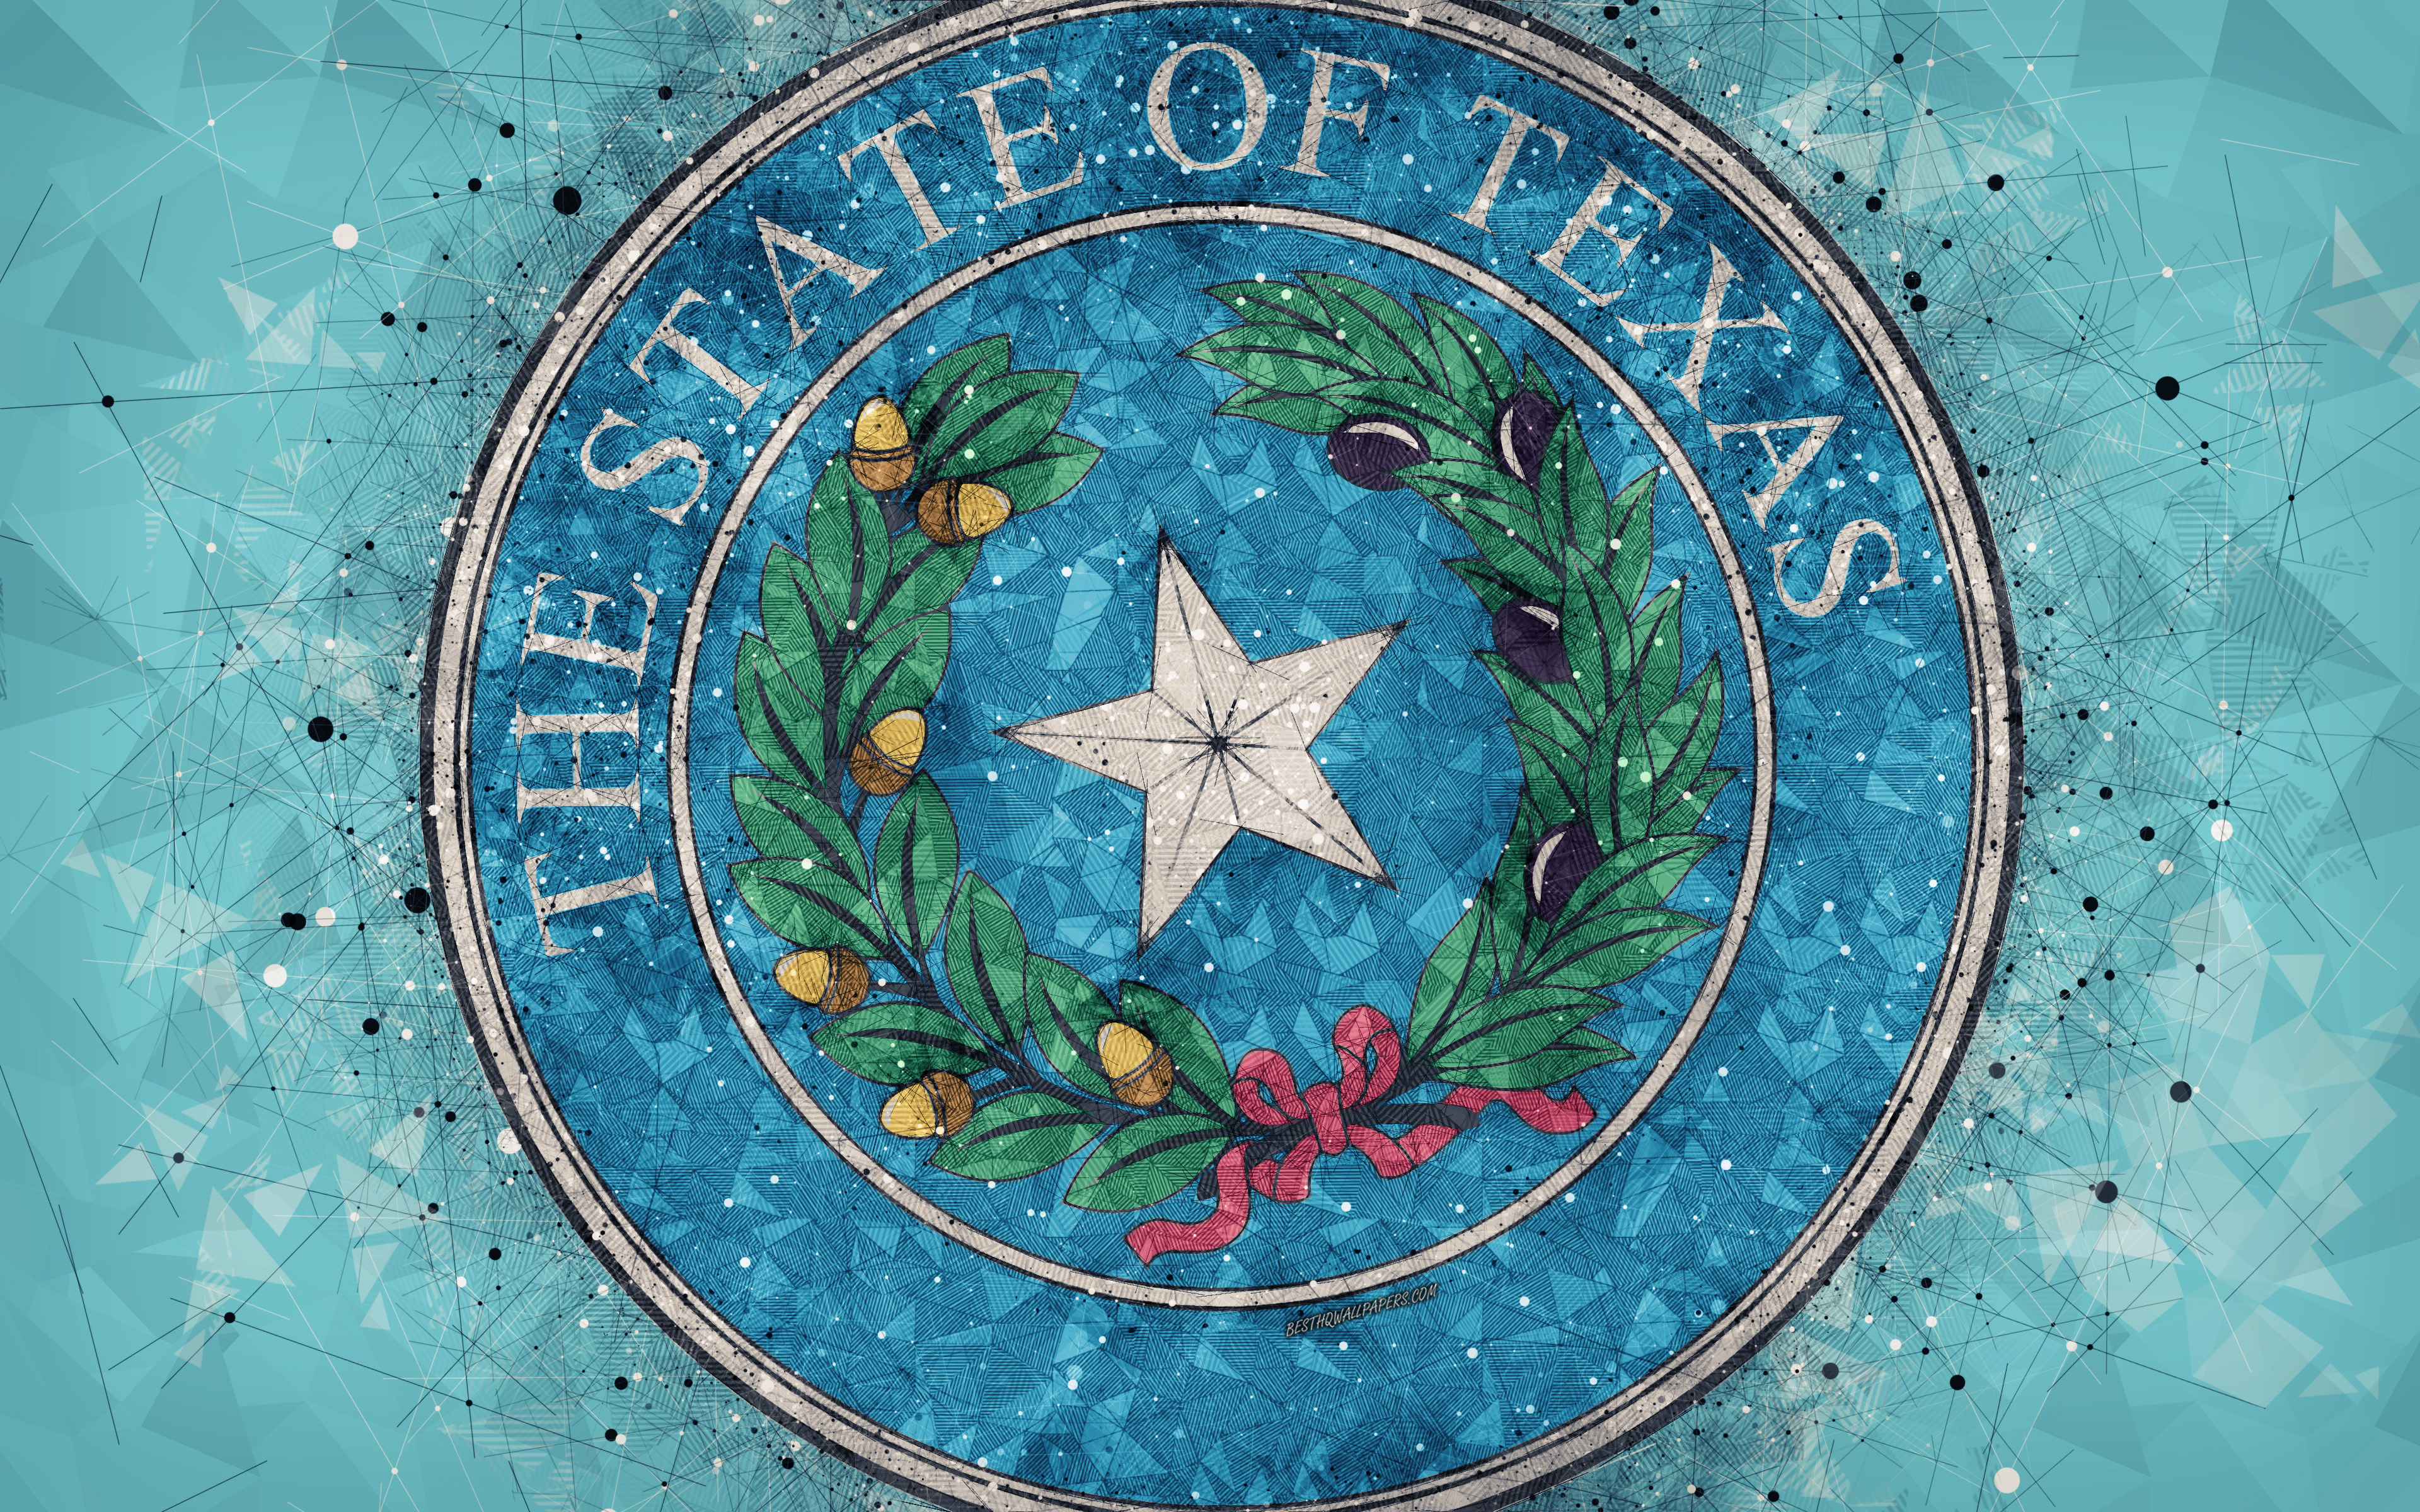 Download wallpaper Seal of Texas, 4k, emblem, geometric art, Texas State Seal, American states, blue background, creative art, Texas, USA, state symbols USA for desktop with resolution 3840x2400. High Quality HD picture